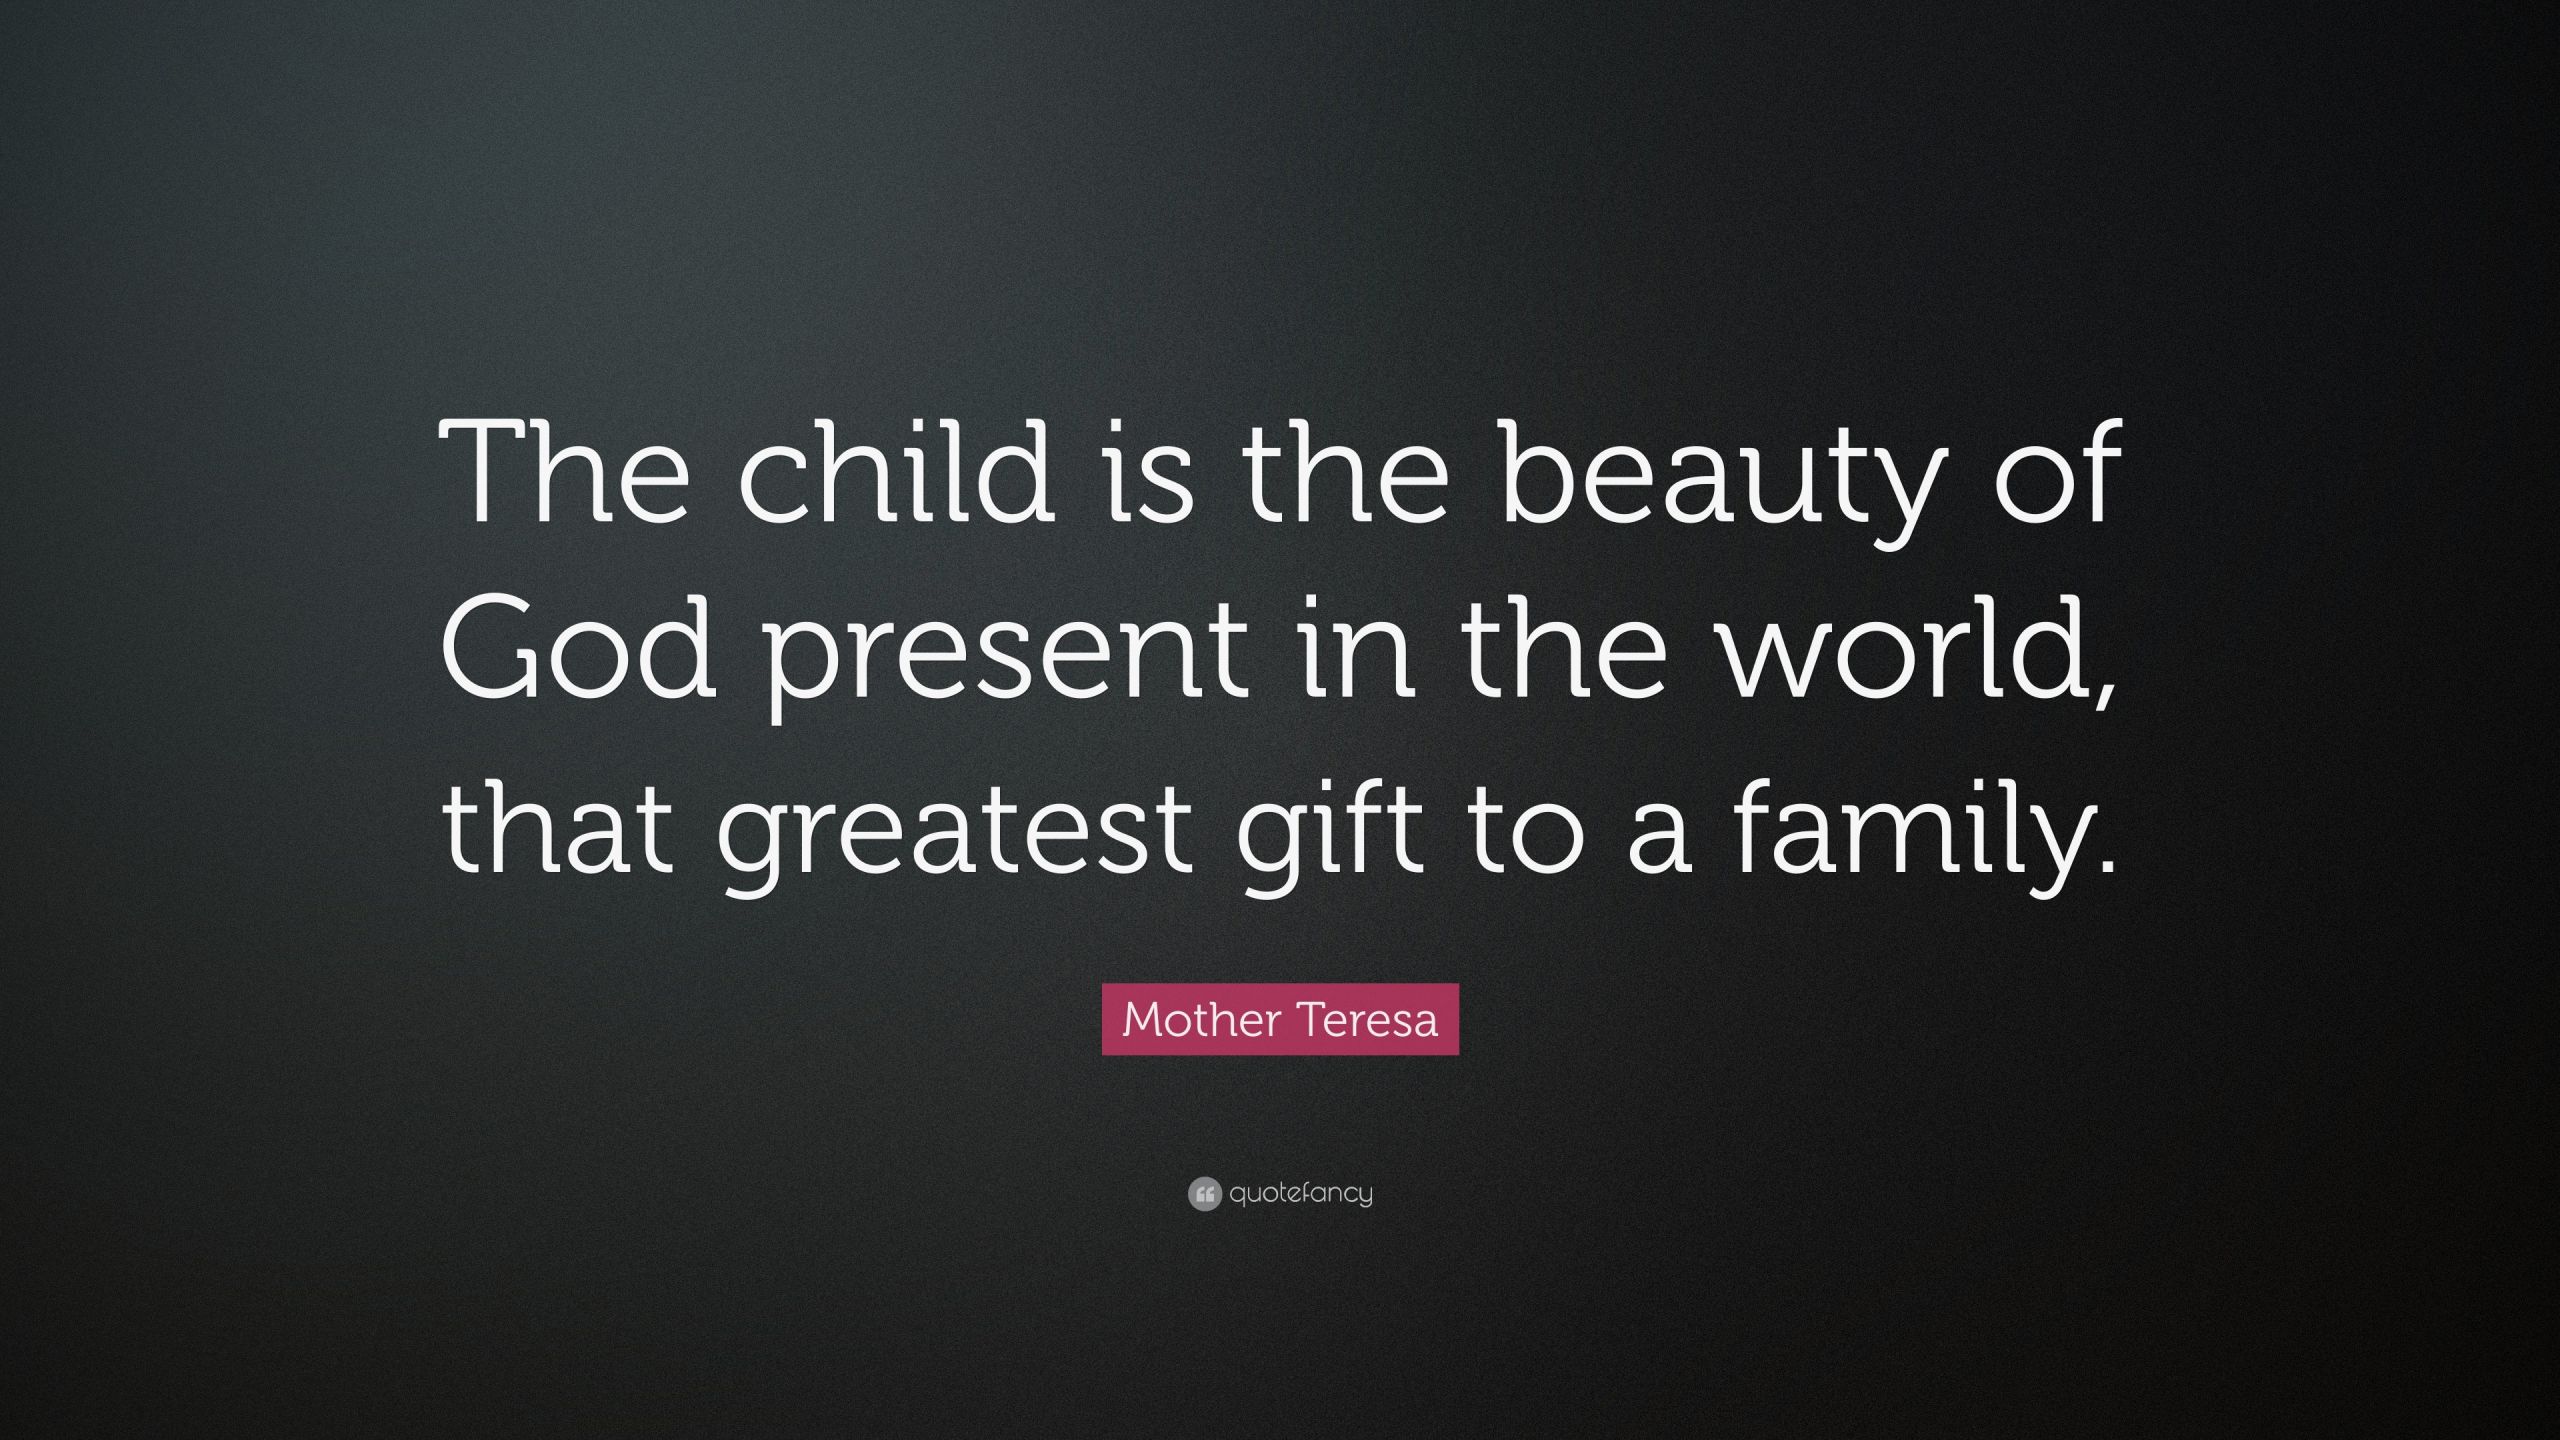 Mother Teresa Quotes About Children
 Mother Teresa Quote “The child is the beauty of God